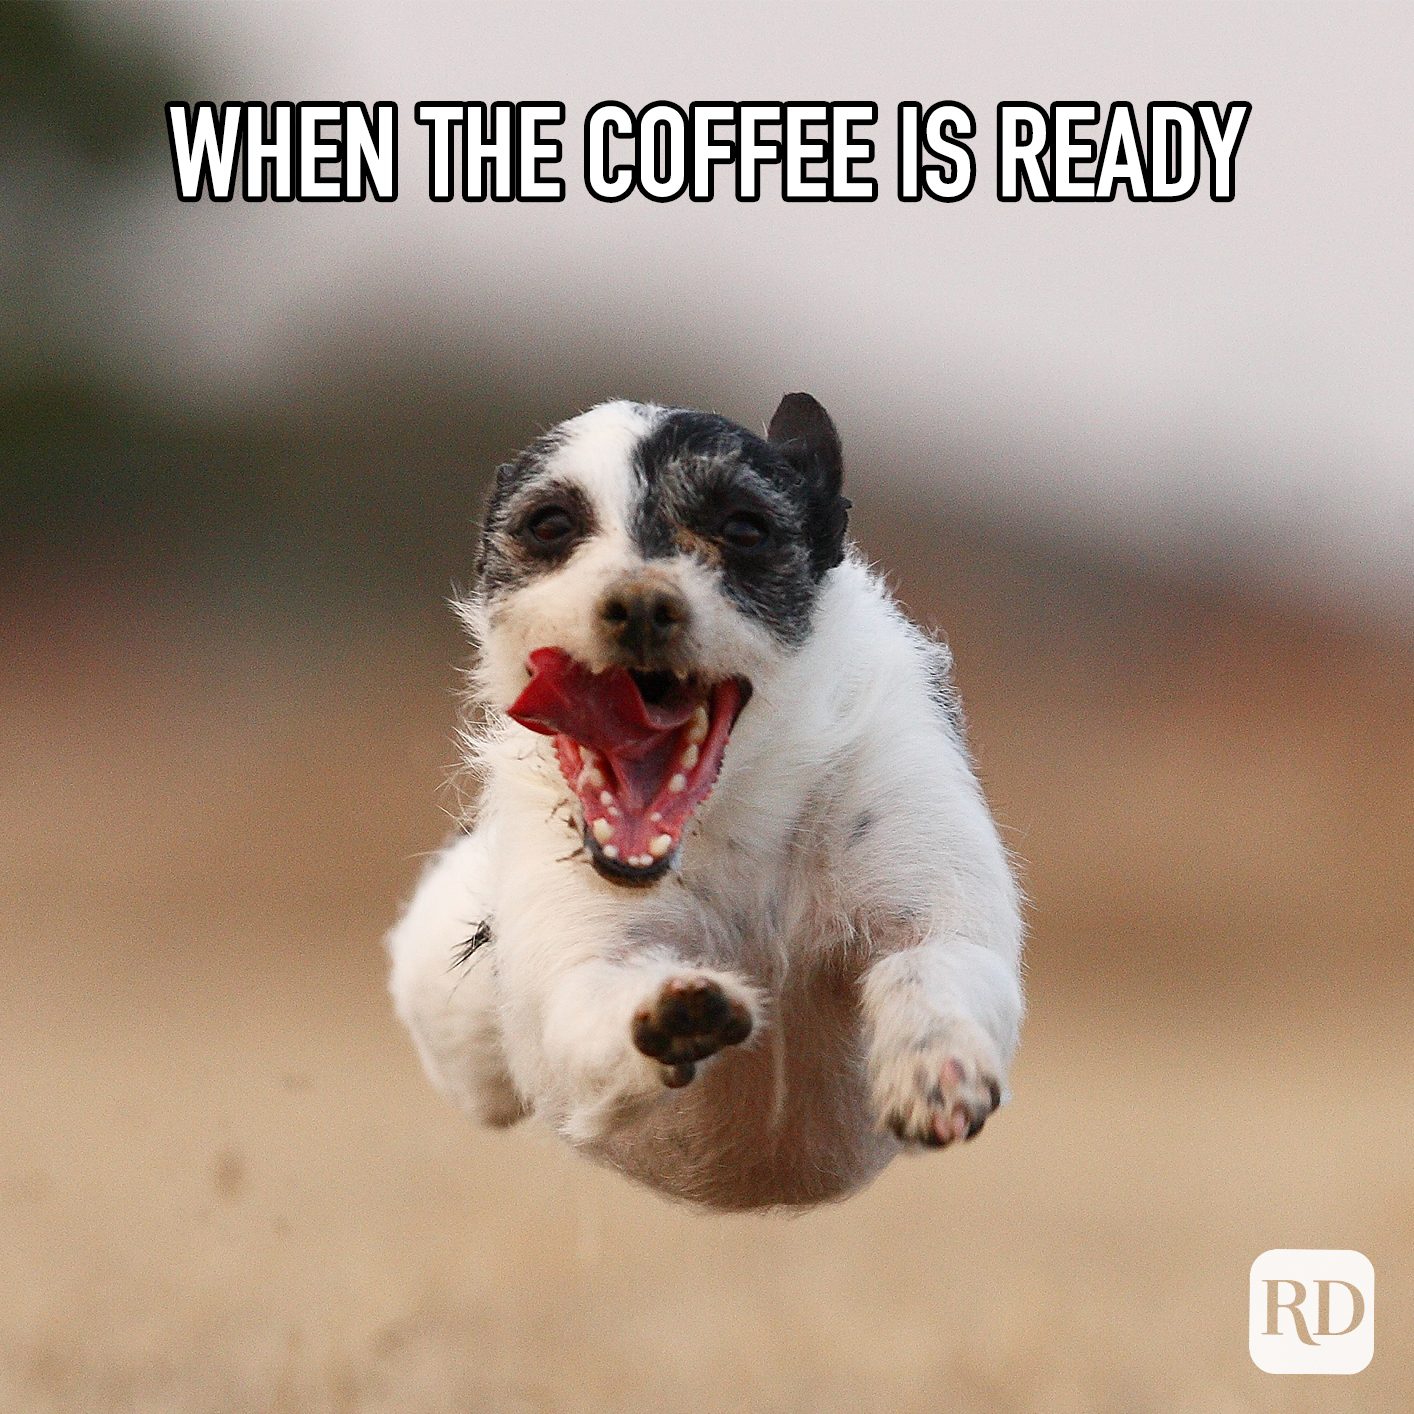 When The Coffee Is Ready meme text of dog flying